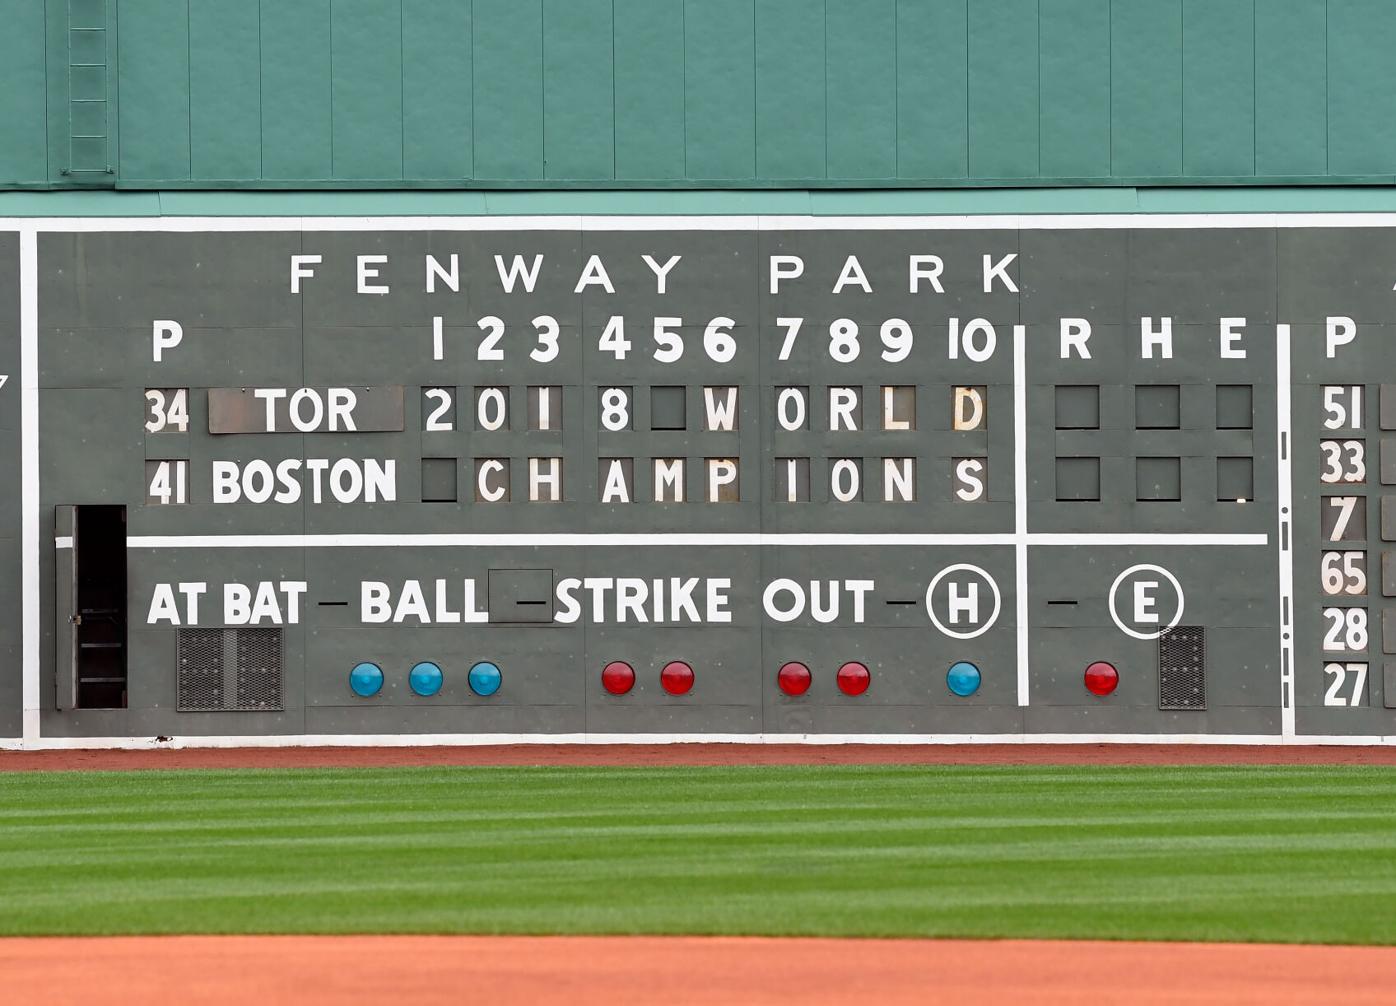 Fenway Park Green Monster and Scoreboard Photograph by Bob